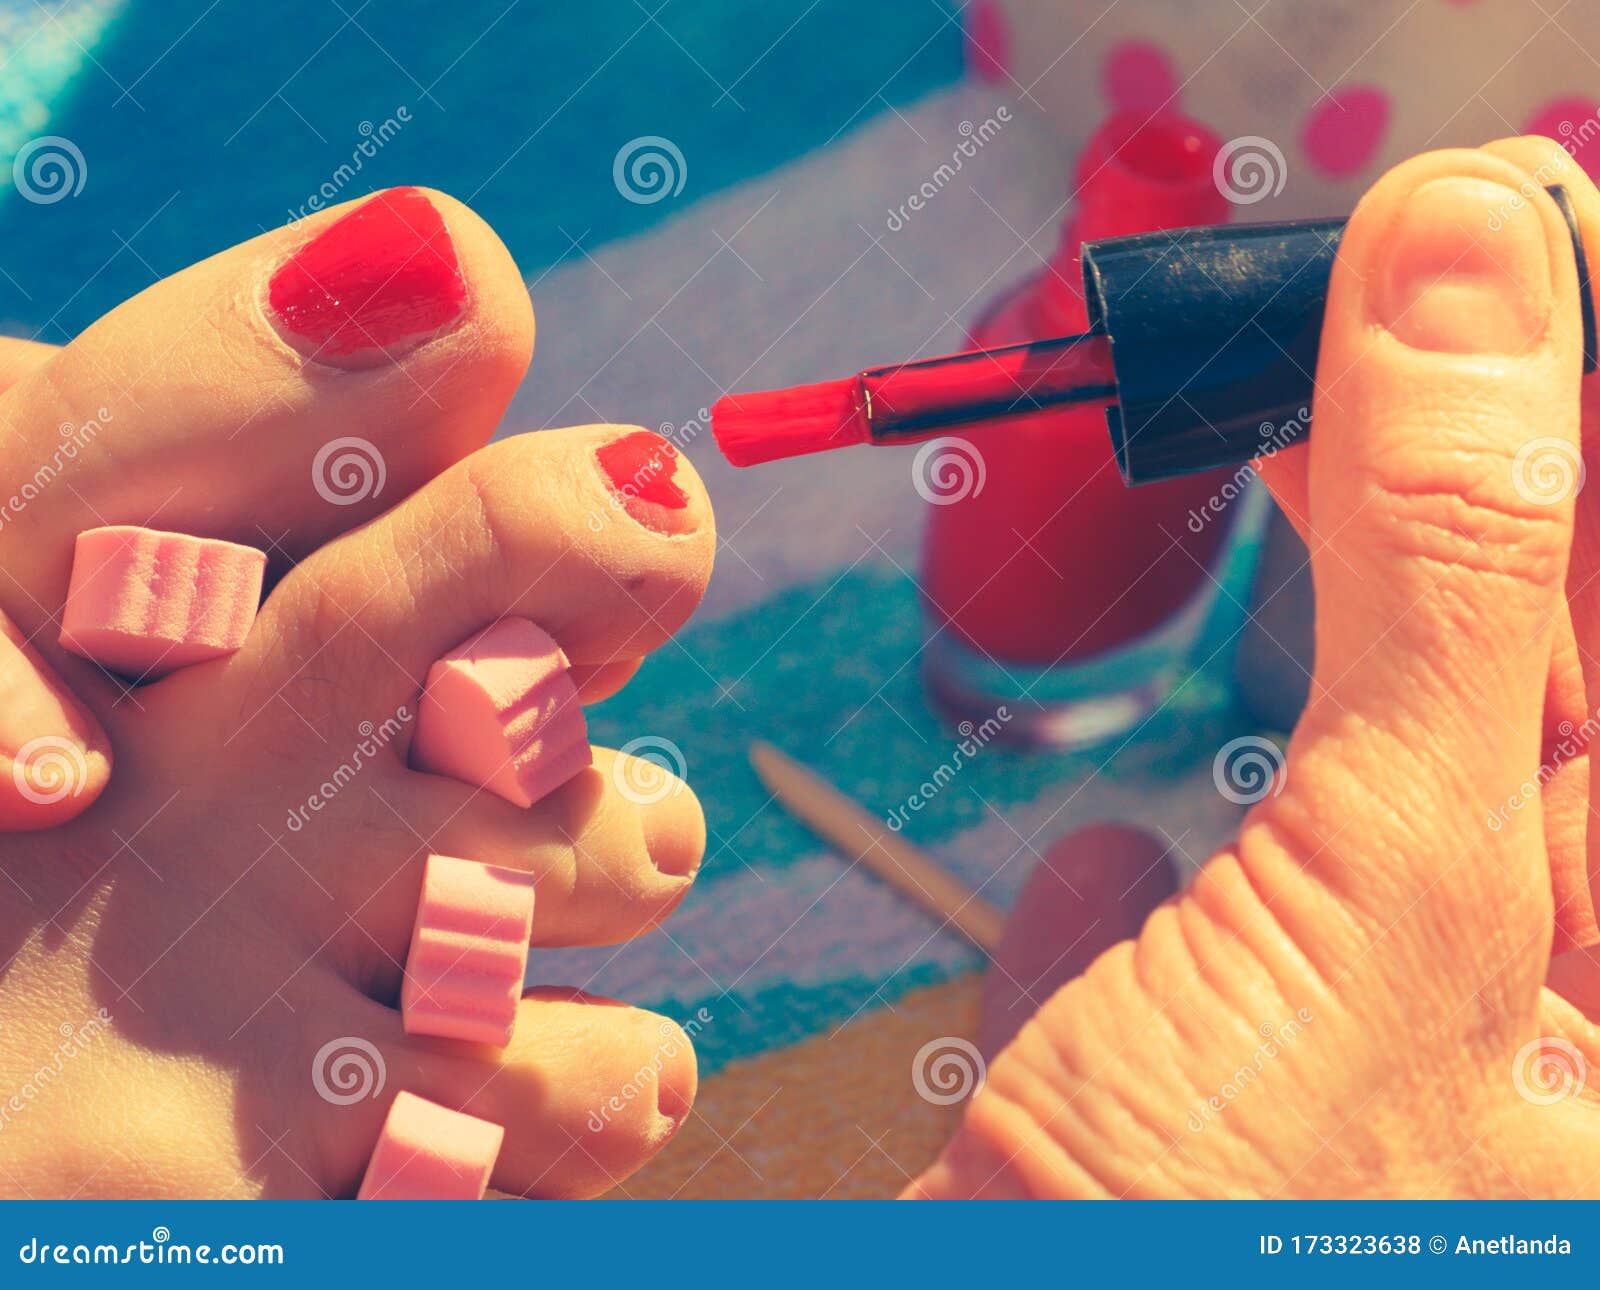 Woman Pedicure with Red Nail Polish Stock Photo - Image of painted ...